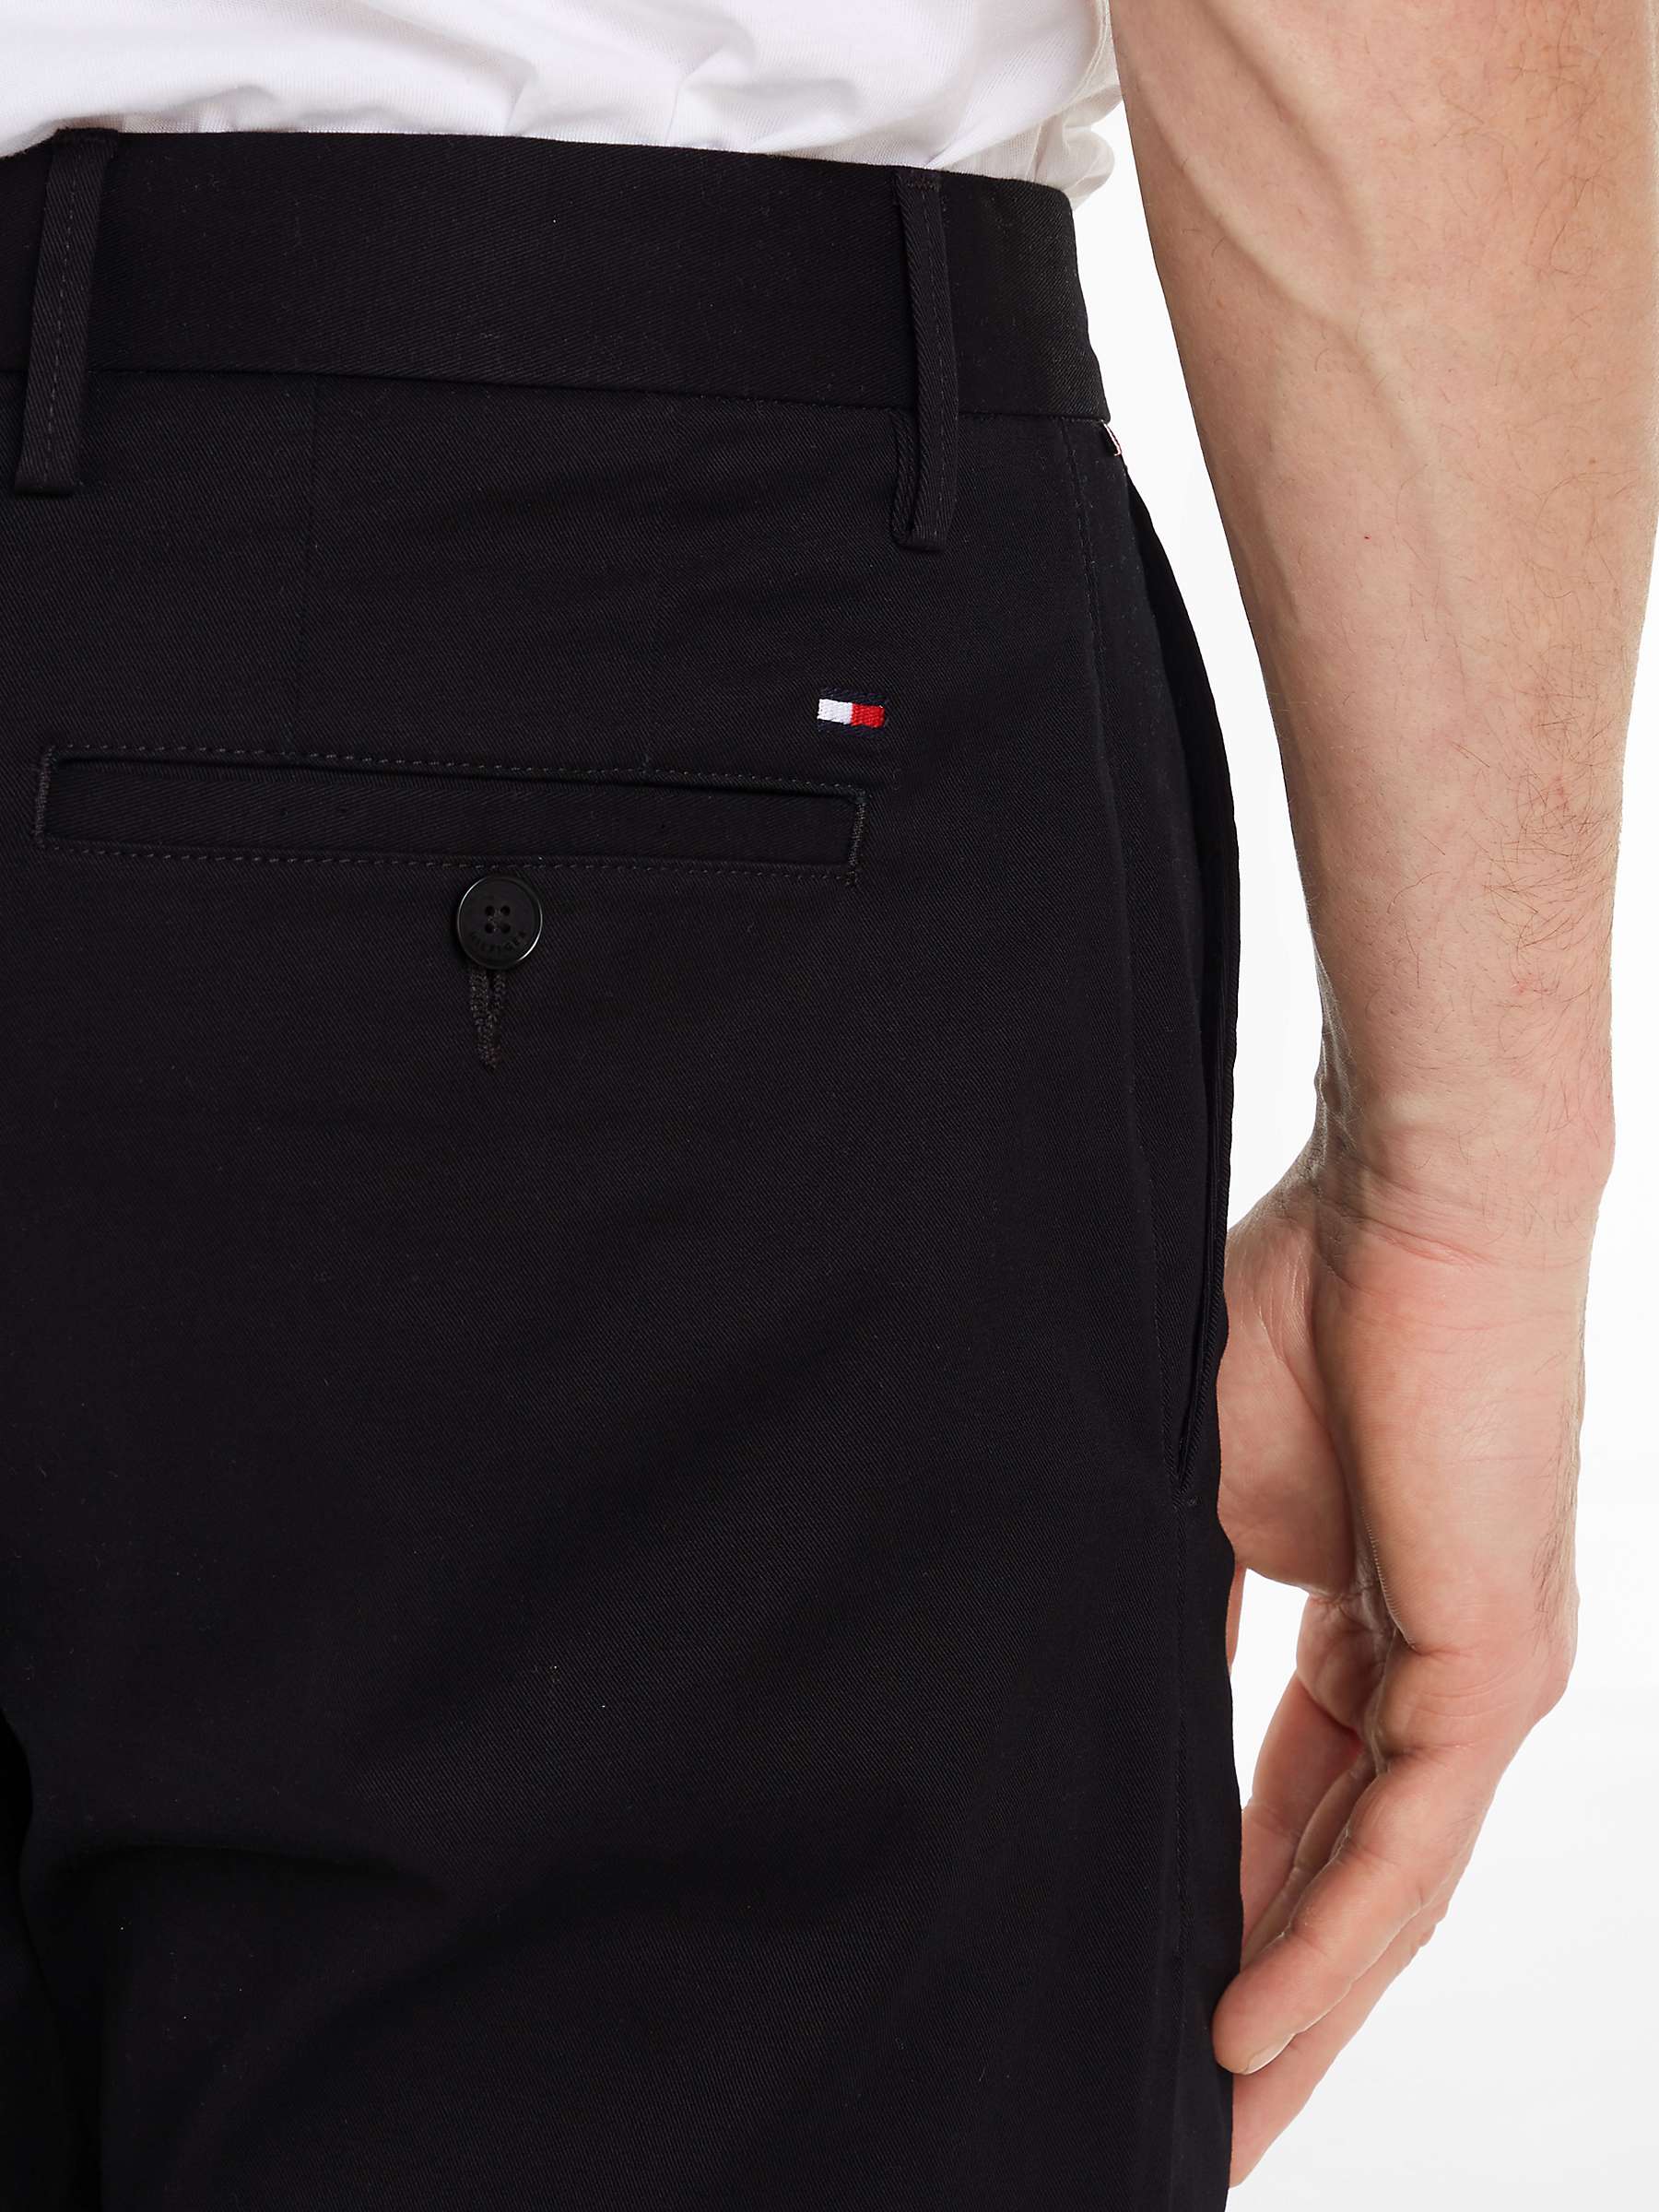 Buy Tommy Hilfiger 1985 Pima Chino Trousers, Black Online at johnlewis.com